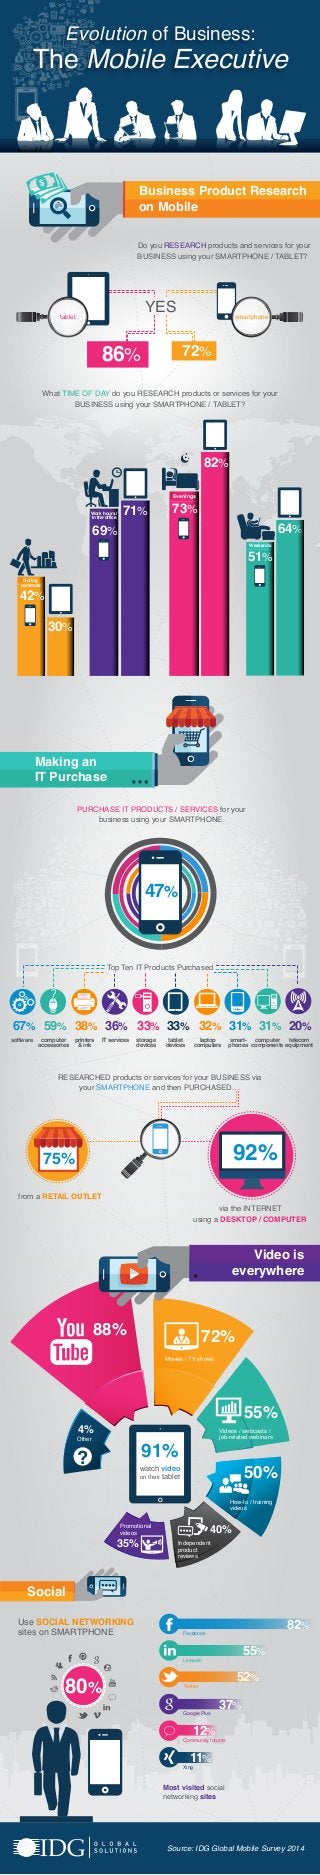 Source: IDG Global Mobile Survey 2014
Evolution of Business:
The Mobile Executive
Do you RESEARCH products and services for your
BUSINESS using your SMARTPHONE / TABLET?
86%
smartphonetablet
YES
72%
Business Product Research
on Mobile
42%
During
commute
30%
73%
Evenings
82%
51%
Weekends
64%69%
Work hours /
in the office
71%
What TIME OF DAY do you RESEARCH products or services for your
BUSINESS using your SMARTPHONE / TABLET?
Making an
IT Purchase
PURCHASE IT PRODUCTS / SERVICES for your
business using your SMARTPHONE
Top Ten IT Products Purchased
67% 59% 38% 36% 33% 33% 32% 31% 31% 20%
software computer
accessories
IT services storage
devices
printers
& ink
computer
components
smart-
phones
tablet
devices
laptop
computers
telecom
equipment
47%
RESEARCHED products or services for your BUSINESS via
your SMARTPHONE and then PURCHASED....
92%
from a RETAIL OUTLET
via the INTERNET
using a DESKTOP / COMPUTER
75%
91%
watch video
on their tablet
Video is
everywhere
88% 72%
35%
4%
50%
40%
?
55%
Movies / TV shows
Videos / webcasts /
job-related webinars
How-to / training
videos
Independent
product
reviews
Promotional
videos
Other
82%
55%
52%
37%
12%
11%
Xing
Community forums
LinkedIn
Google Plus
Twitter
Facebook
80%
Use SOCIAL NETWORKING
sites on SMARTPHONE
Social
Most visited social
networking sites
 